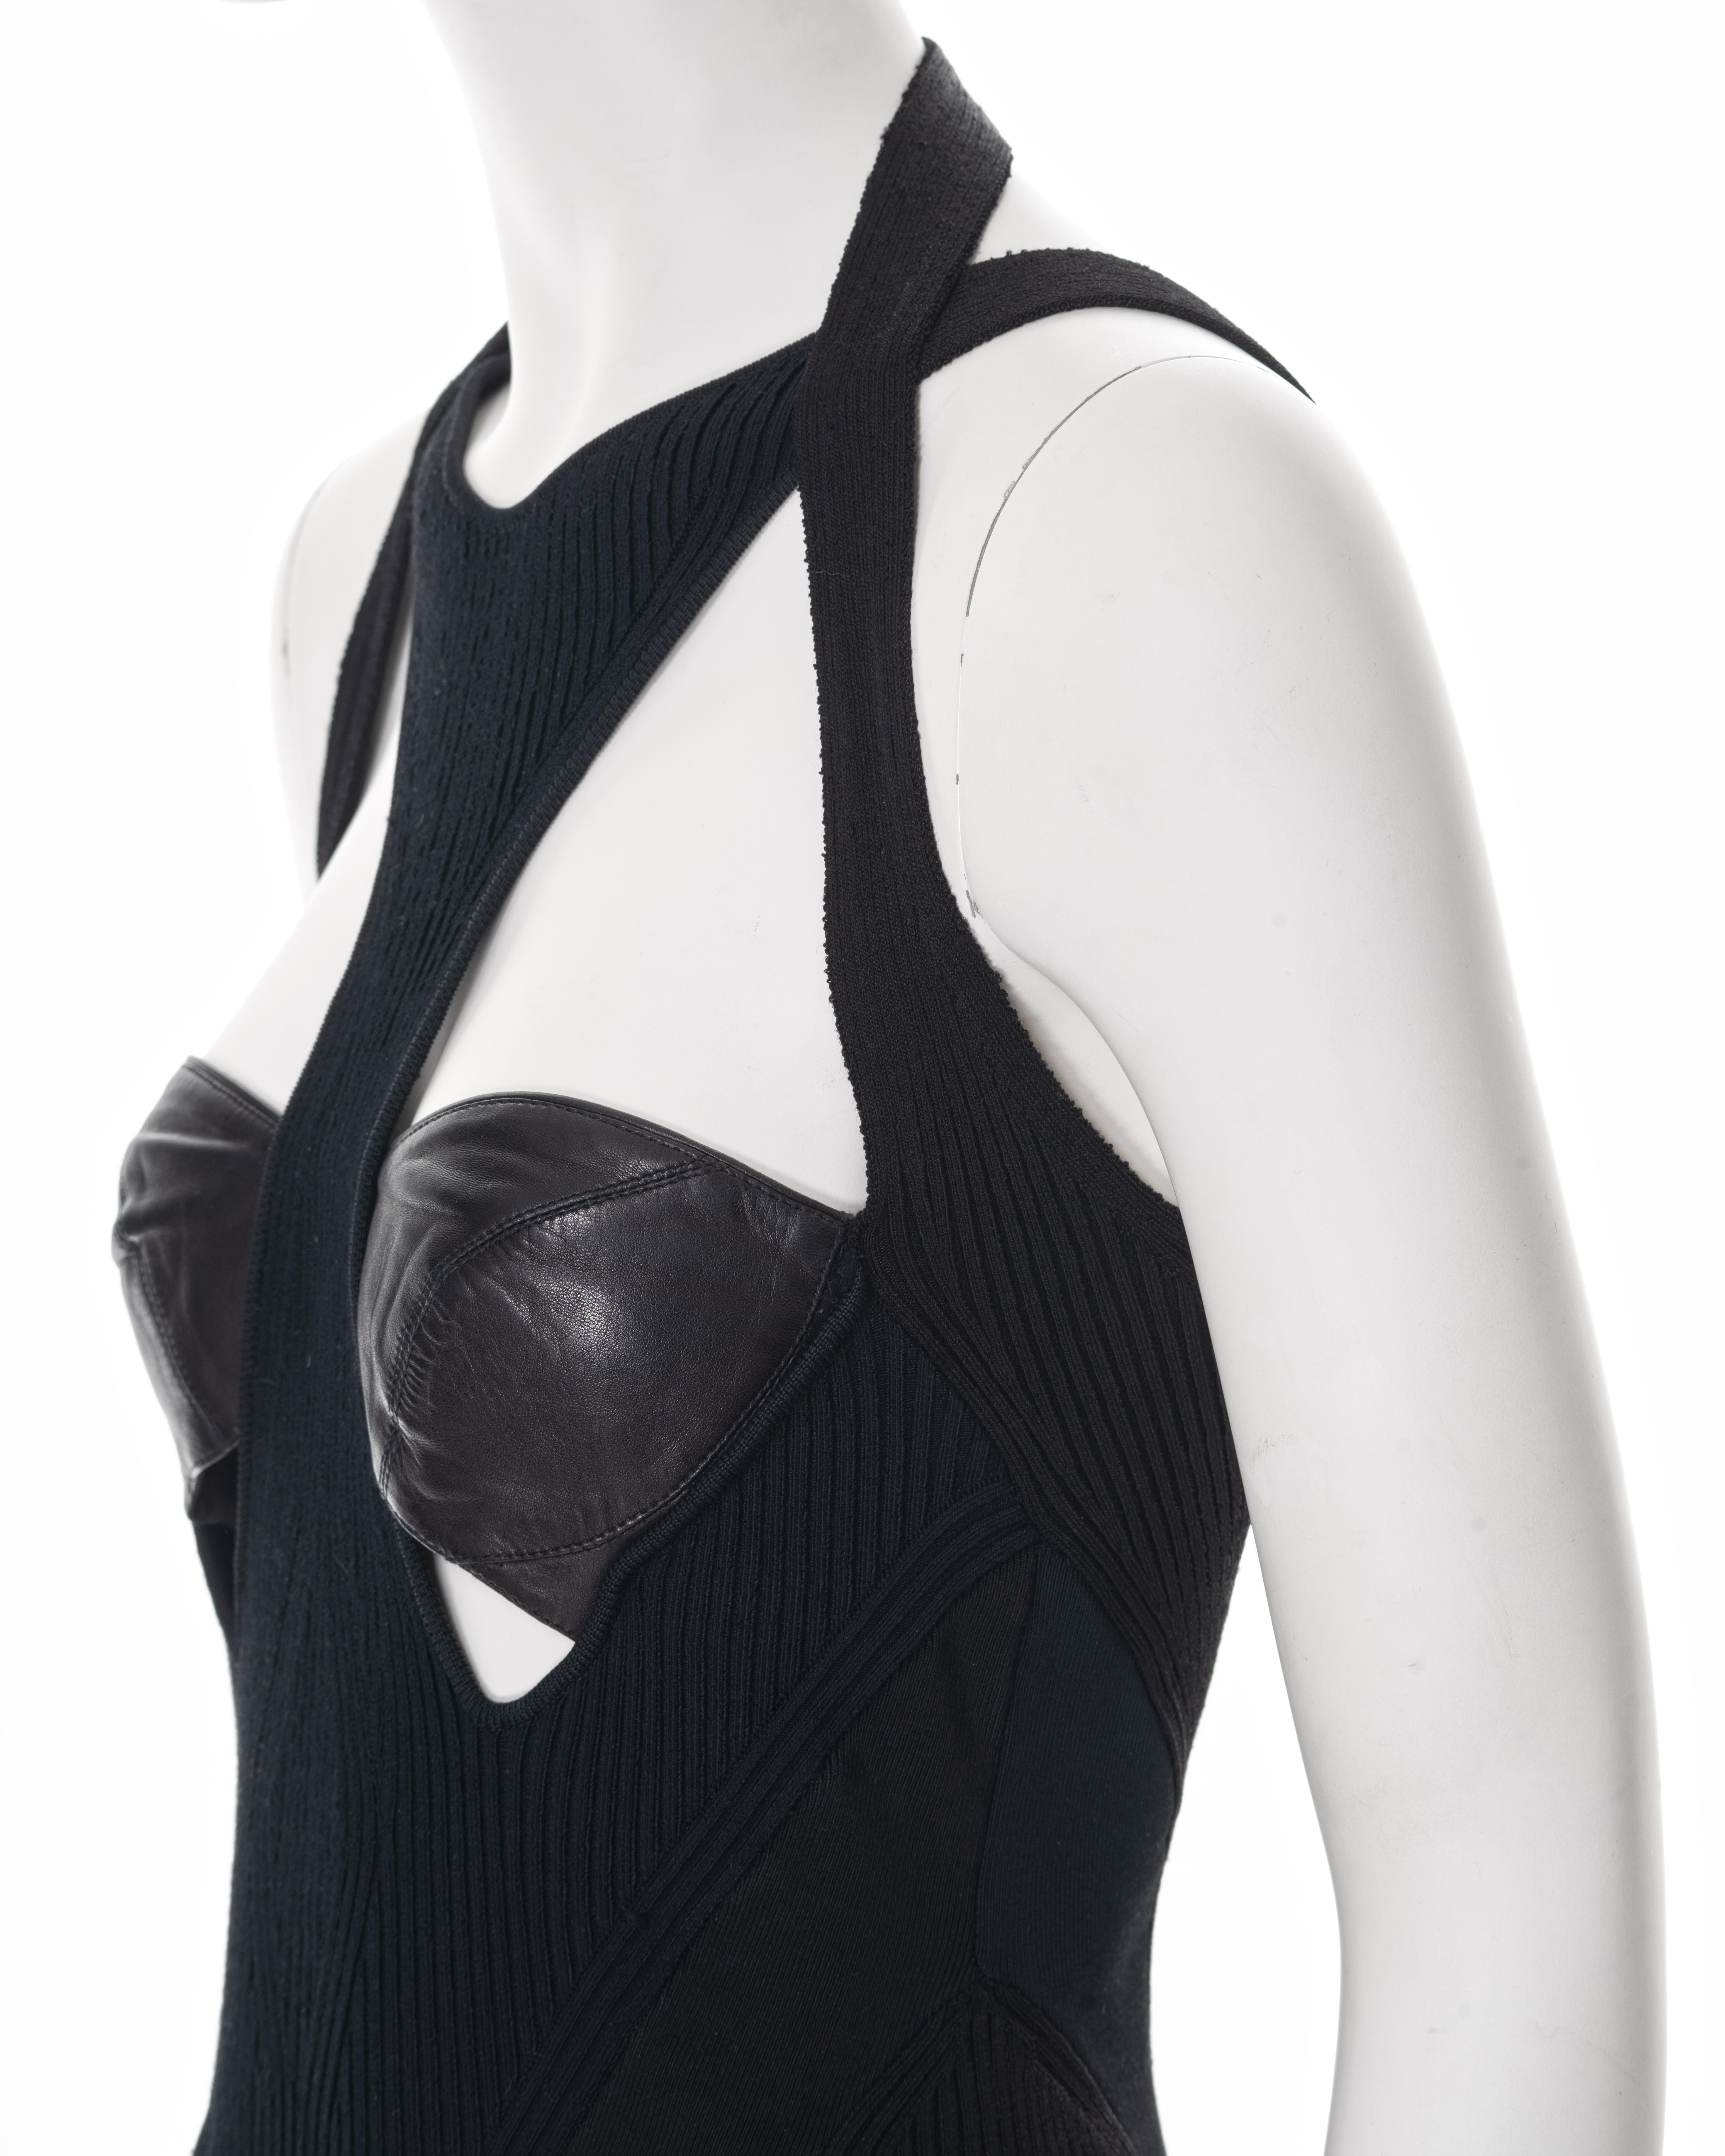 Alexander McQueen black rib knit mini dress with leather bustier, ss 2004 For Sale 7